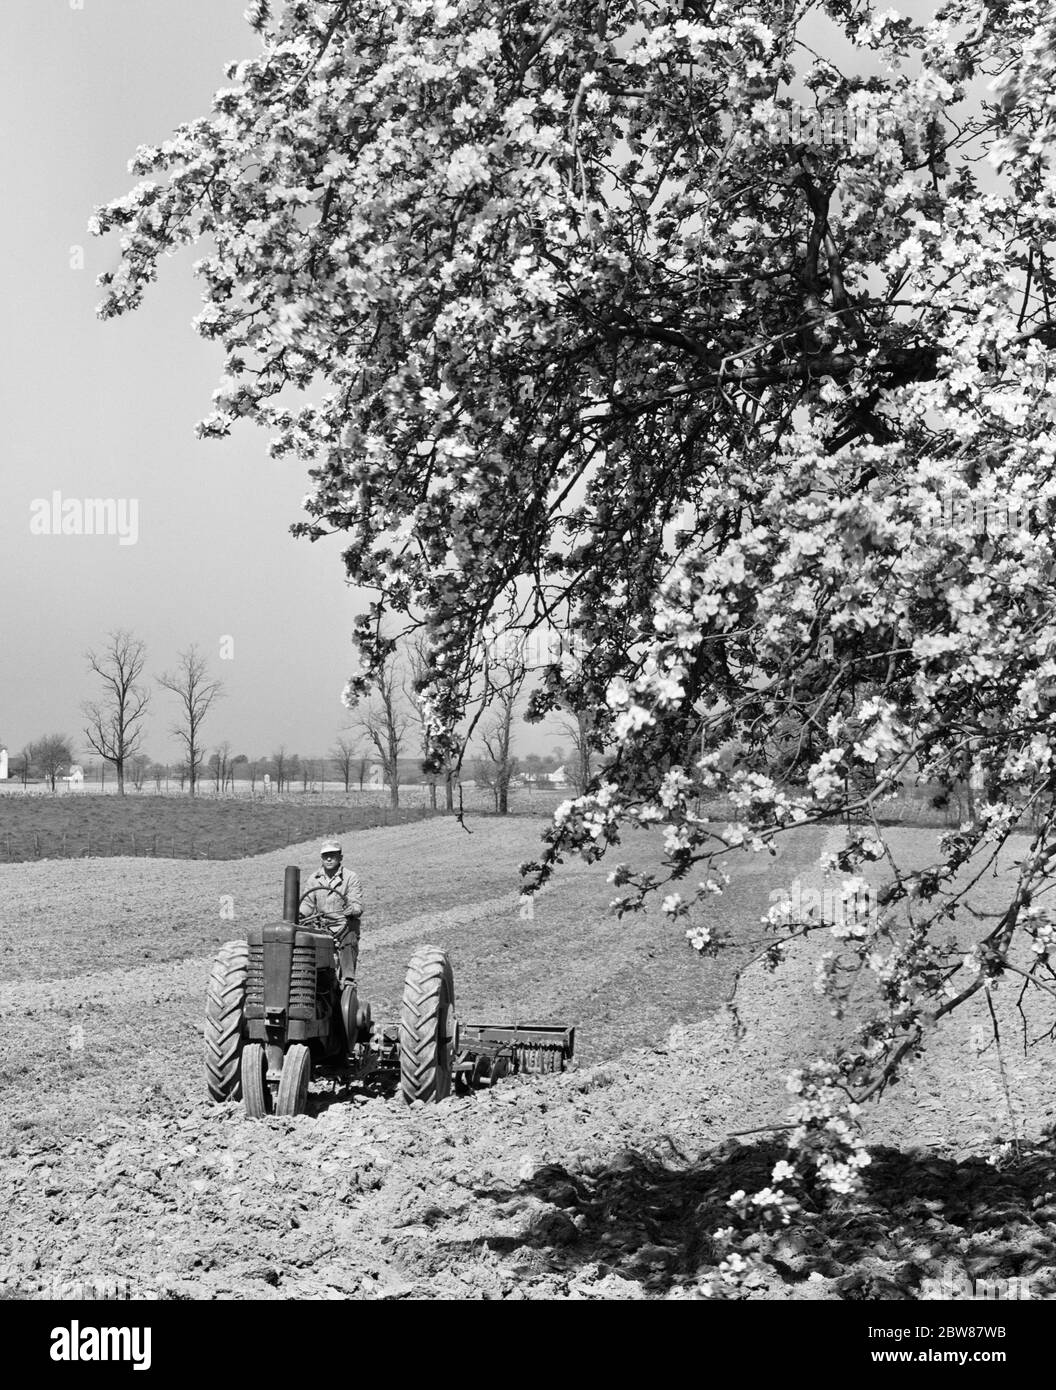 1950s FARMER ON TRACTOR CULTIVATING FIELD DRIVING PAST LARGE BLOSSOMING TREE TOWARD CAMERA - f10096 HEL001 HARS BLACK AND WHITE BLOSSOMING CAUCASIAN ETHNICITY CULTIVATING OLD FASHIONED Stock Photo